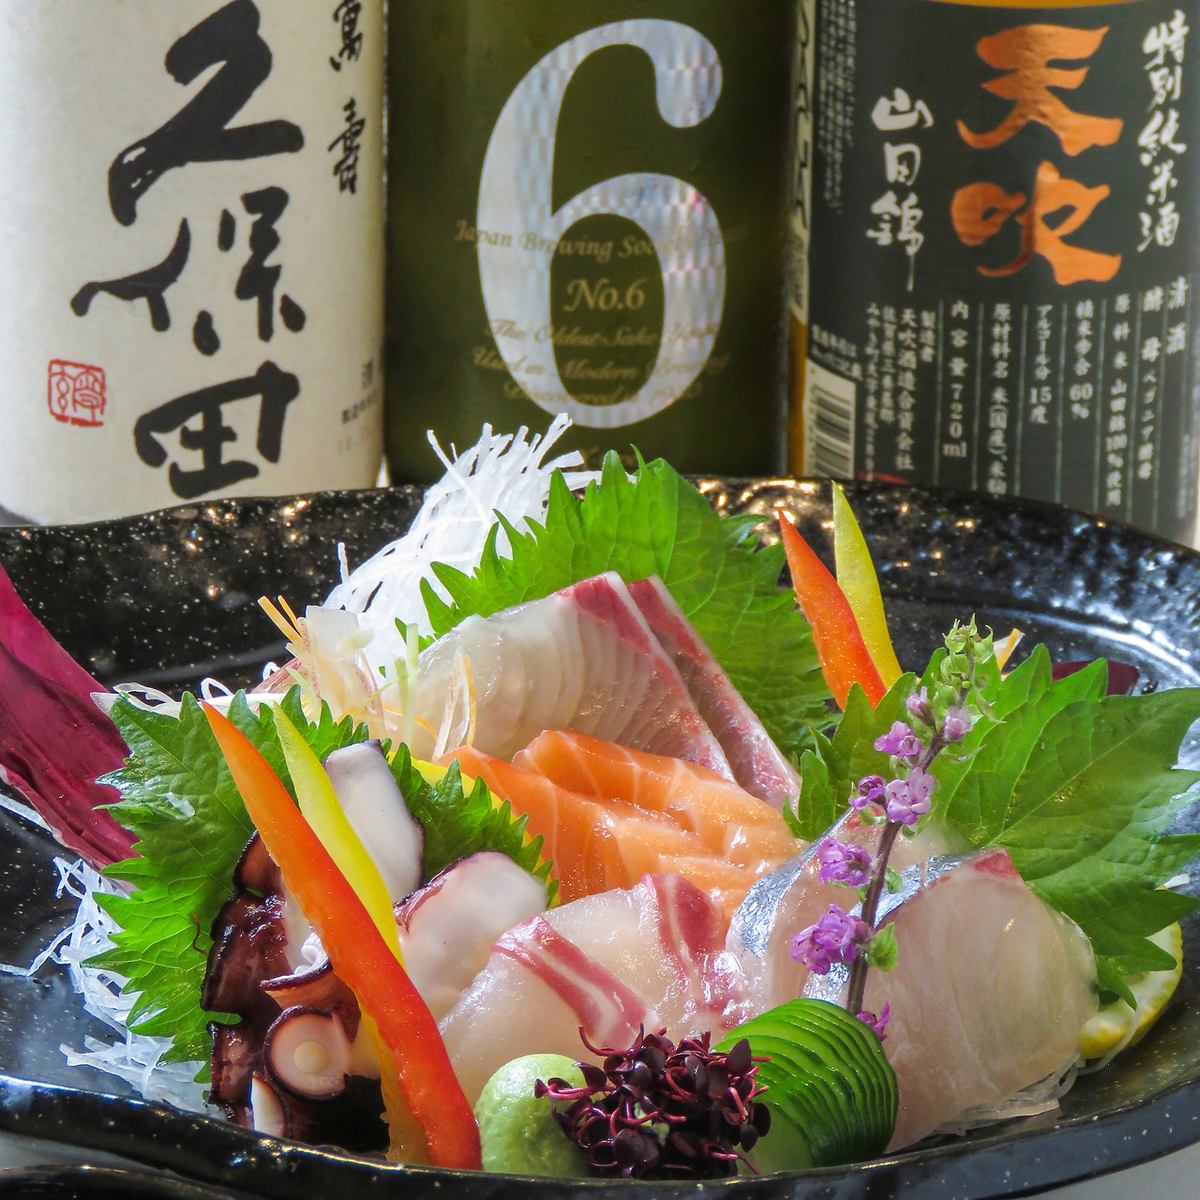 Not just yakitori! Fresh sashimi and other fish dishes are also available!